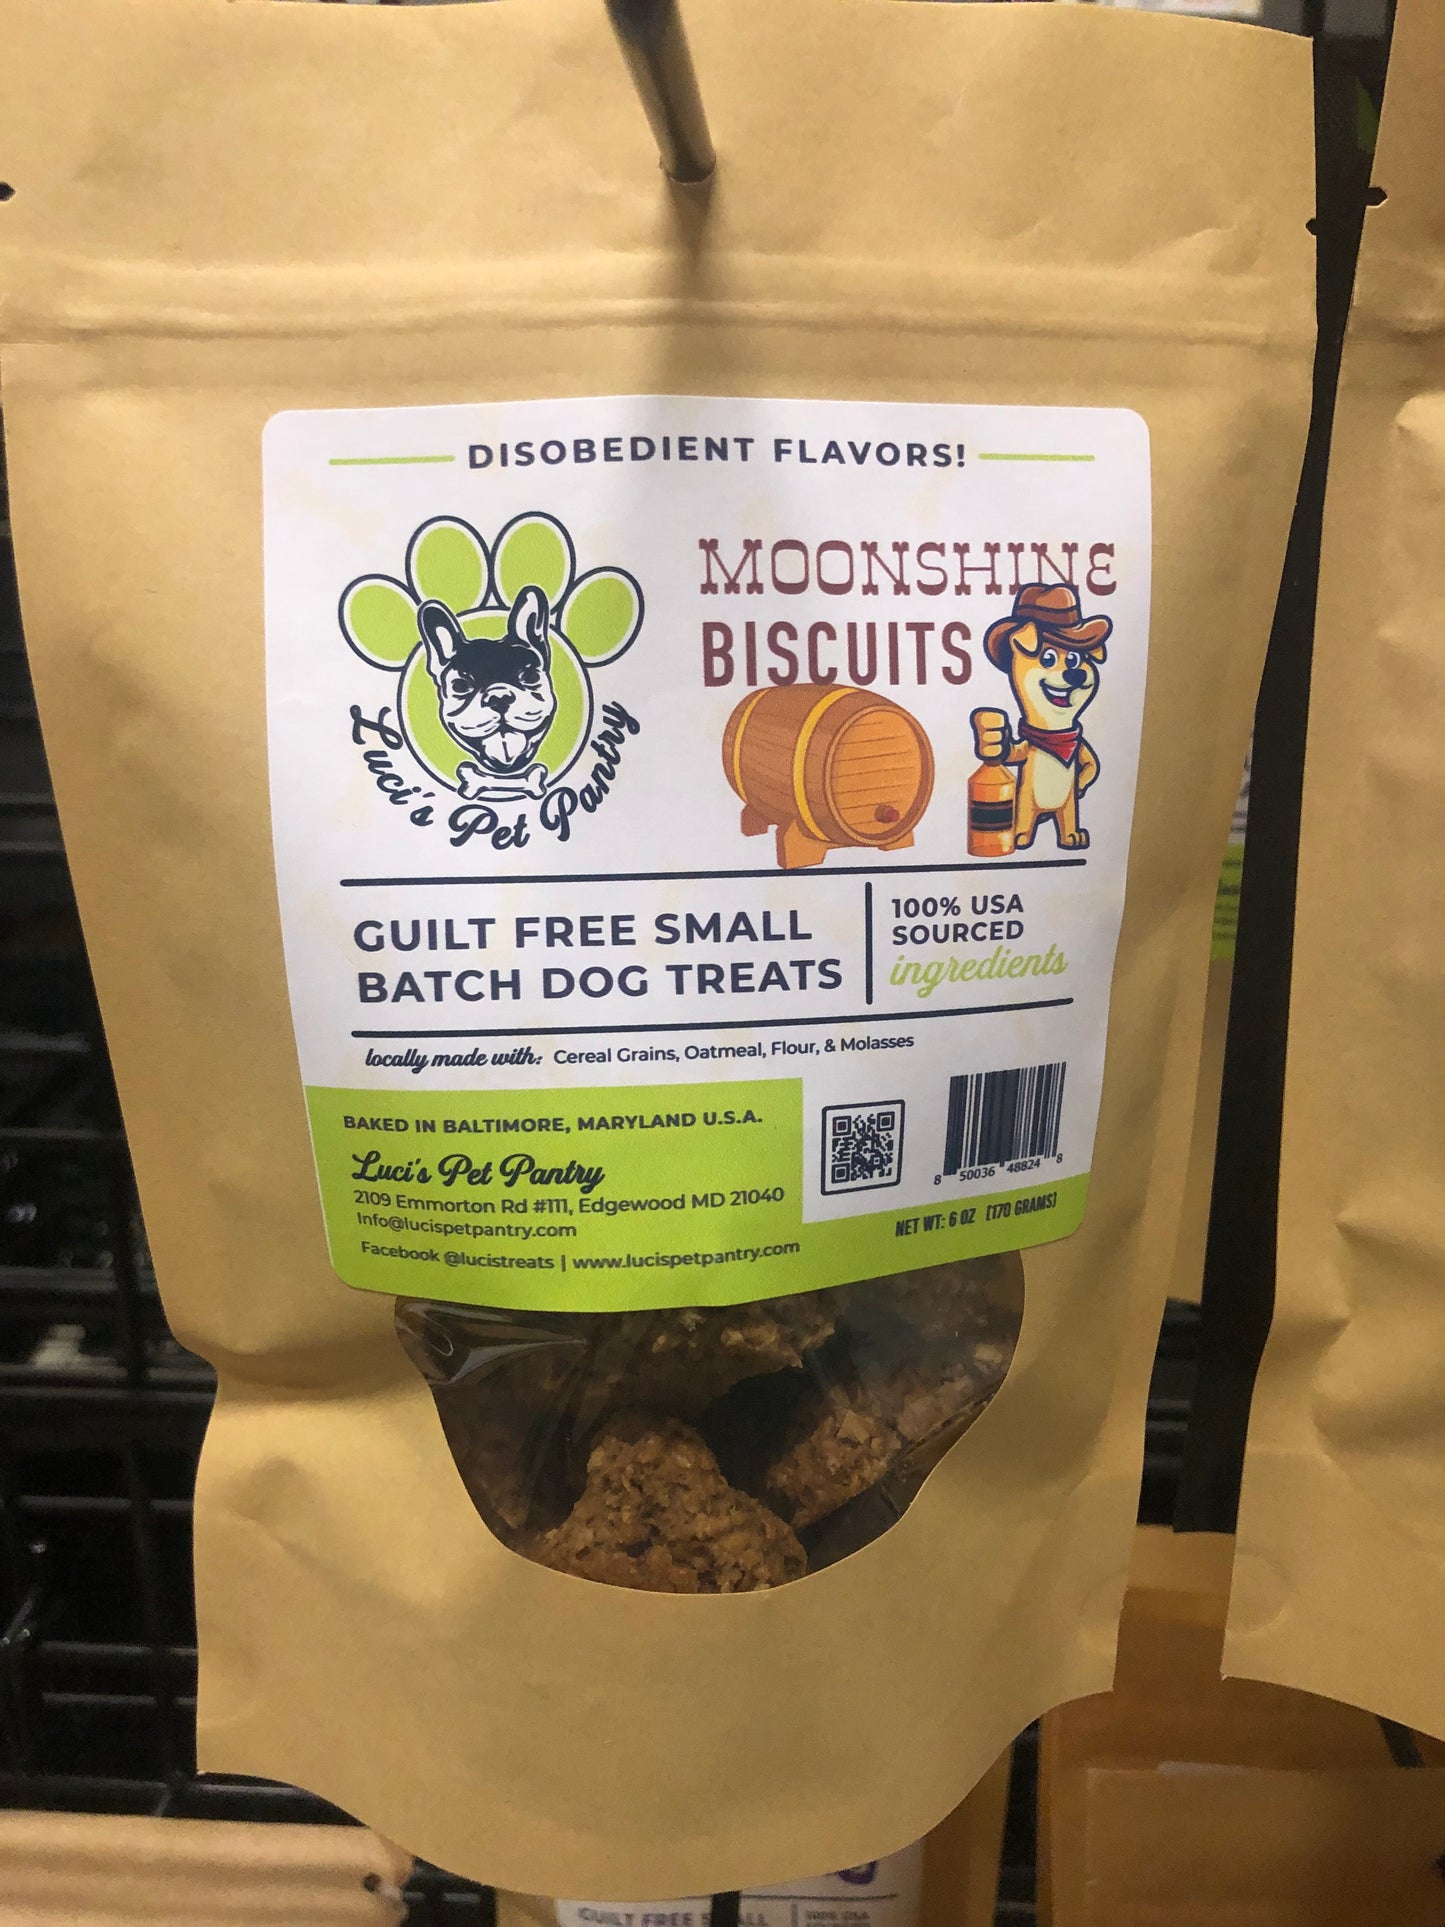 Whiskey Biscuits - All Natural "Cereal Grains" Dog & Puppy Treats - Disobedient Biscuits 6 oz. Pouch